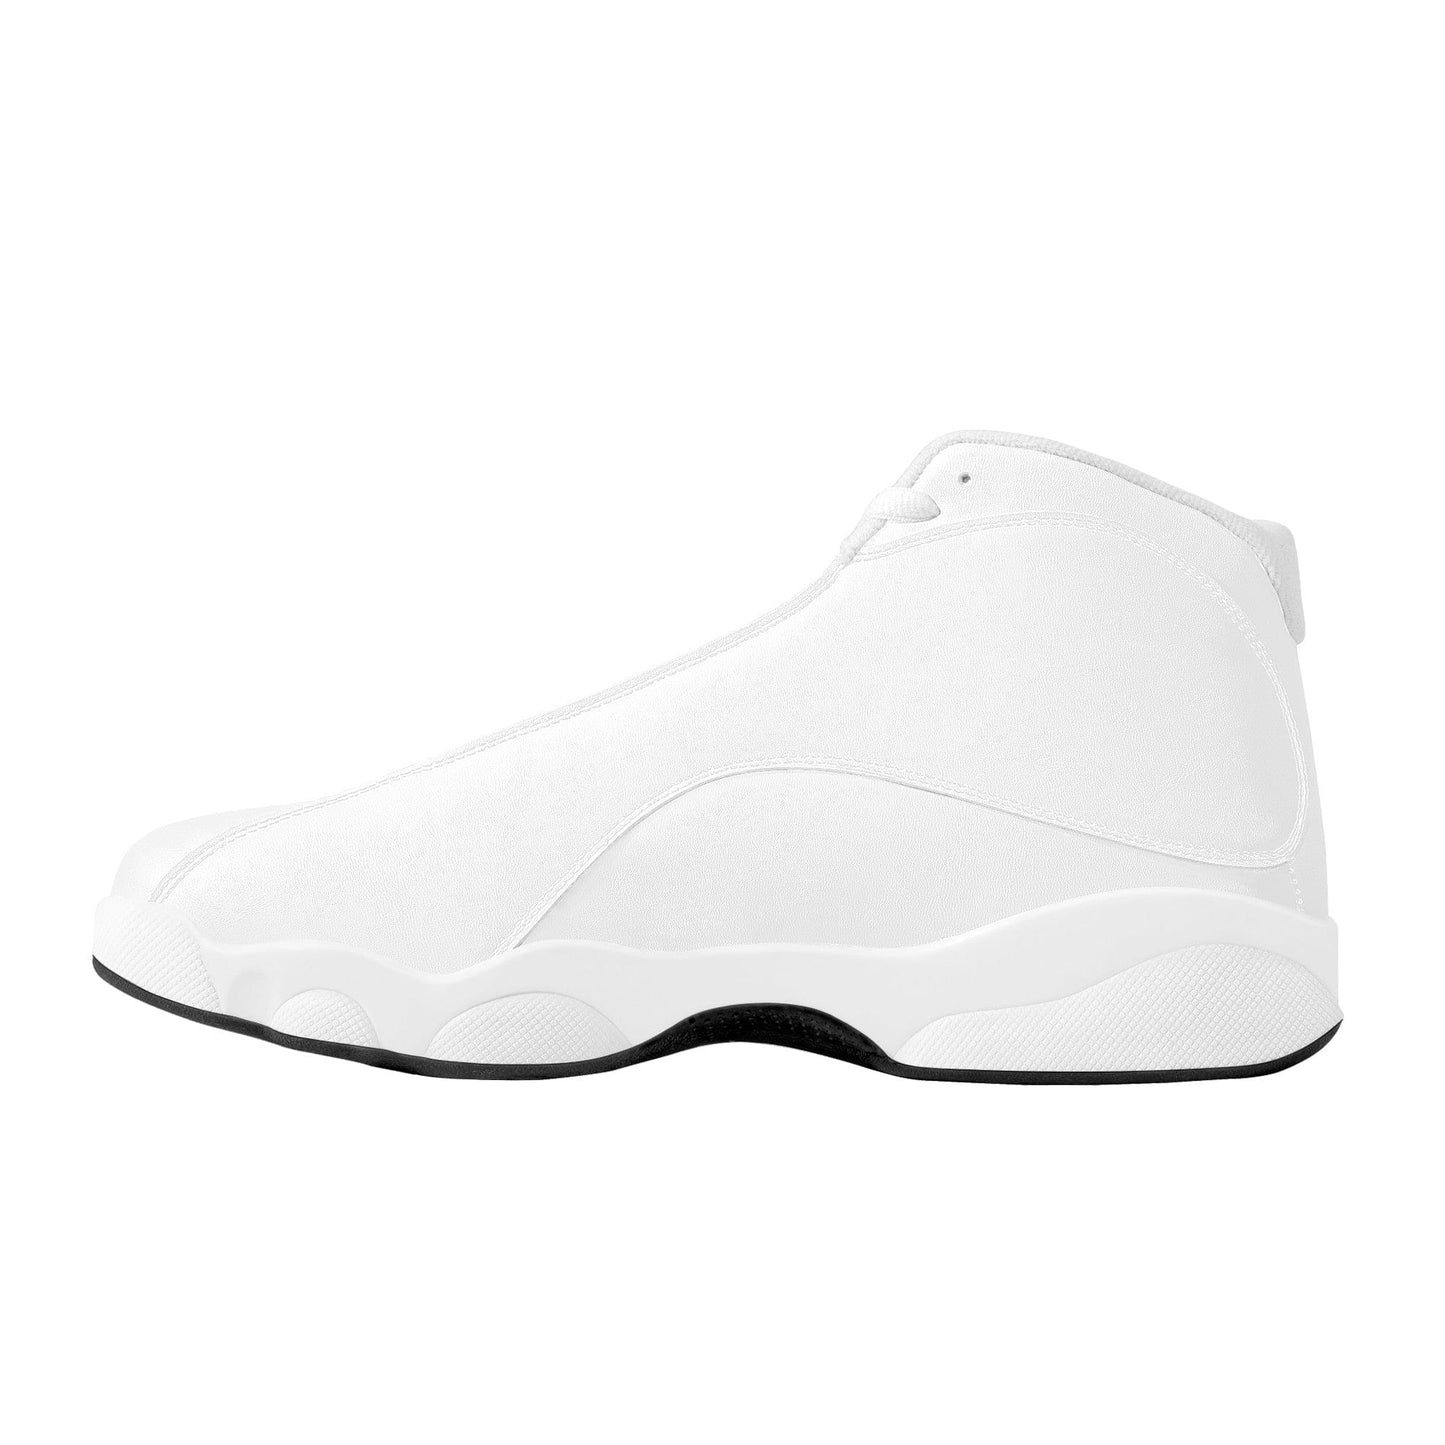 Custom Basketball Shoes high tops - White Colloid Colors 